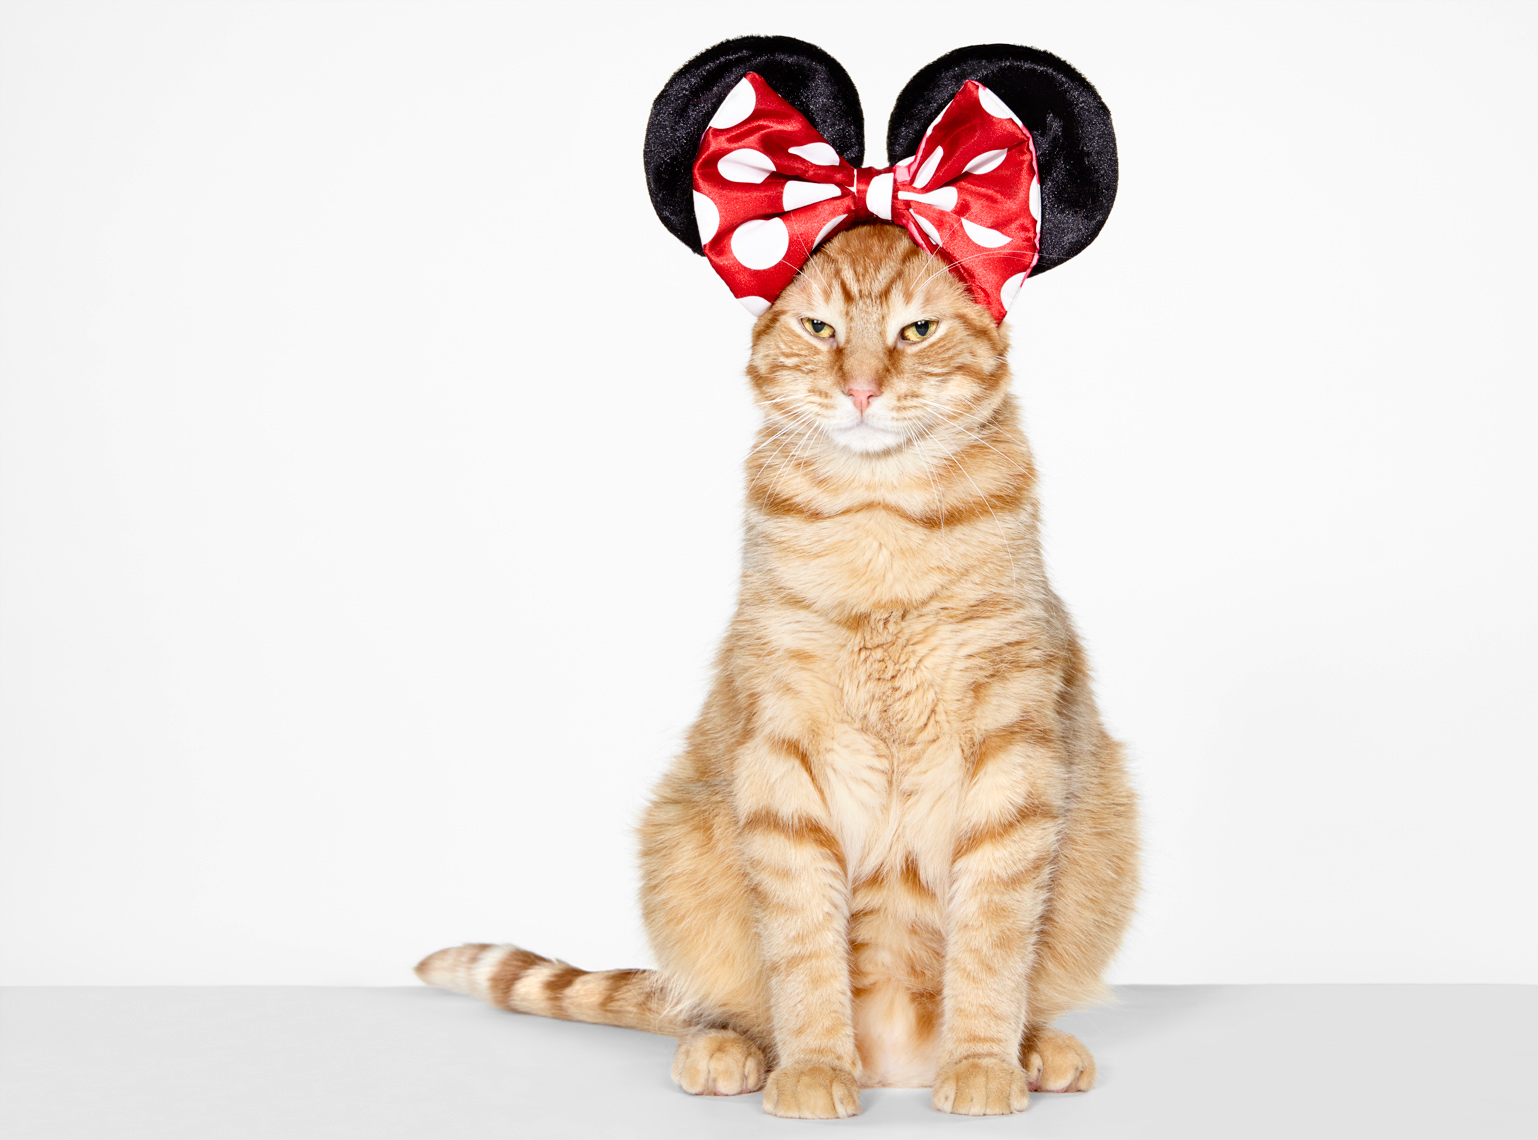 Cat at minnie mouse ears